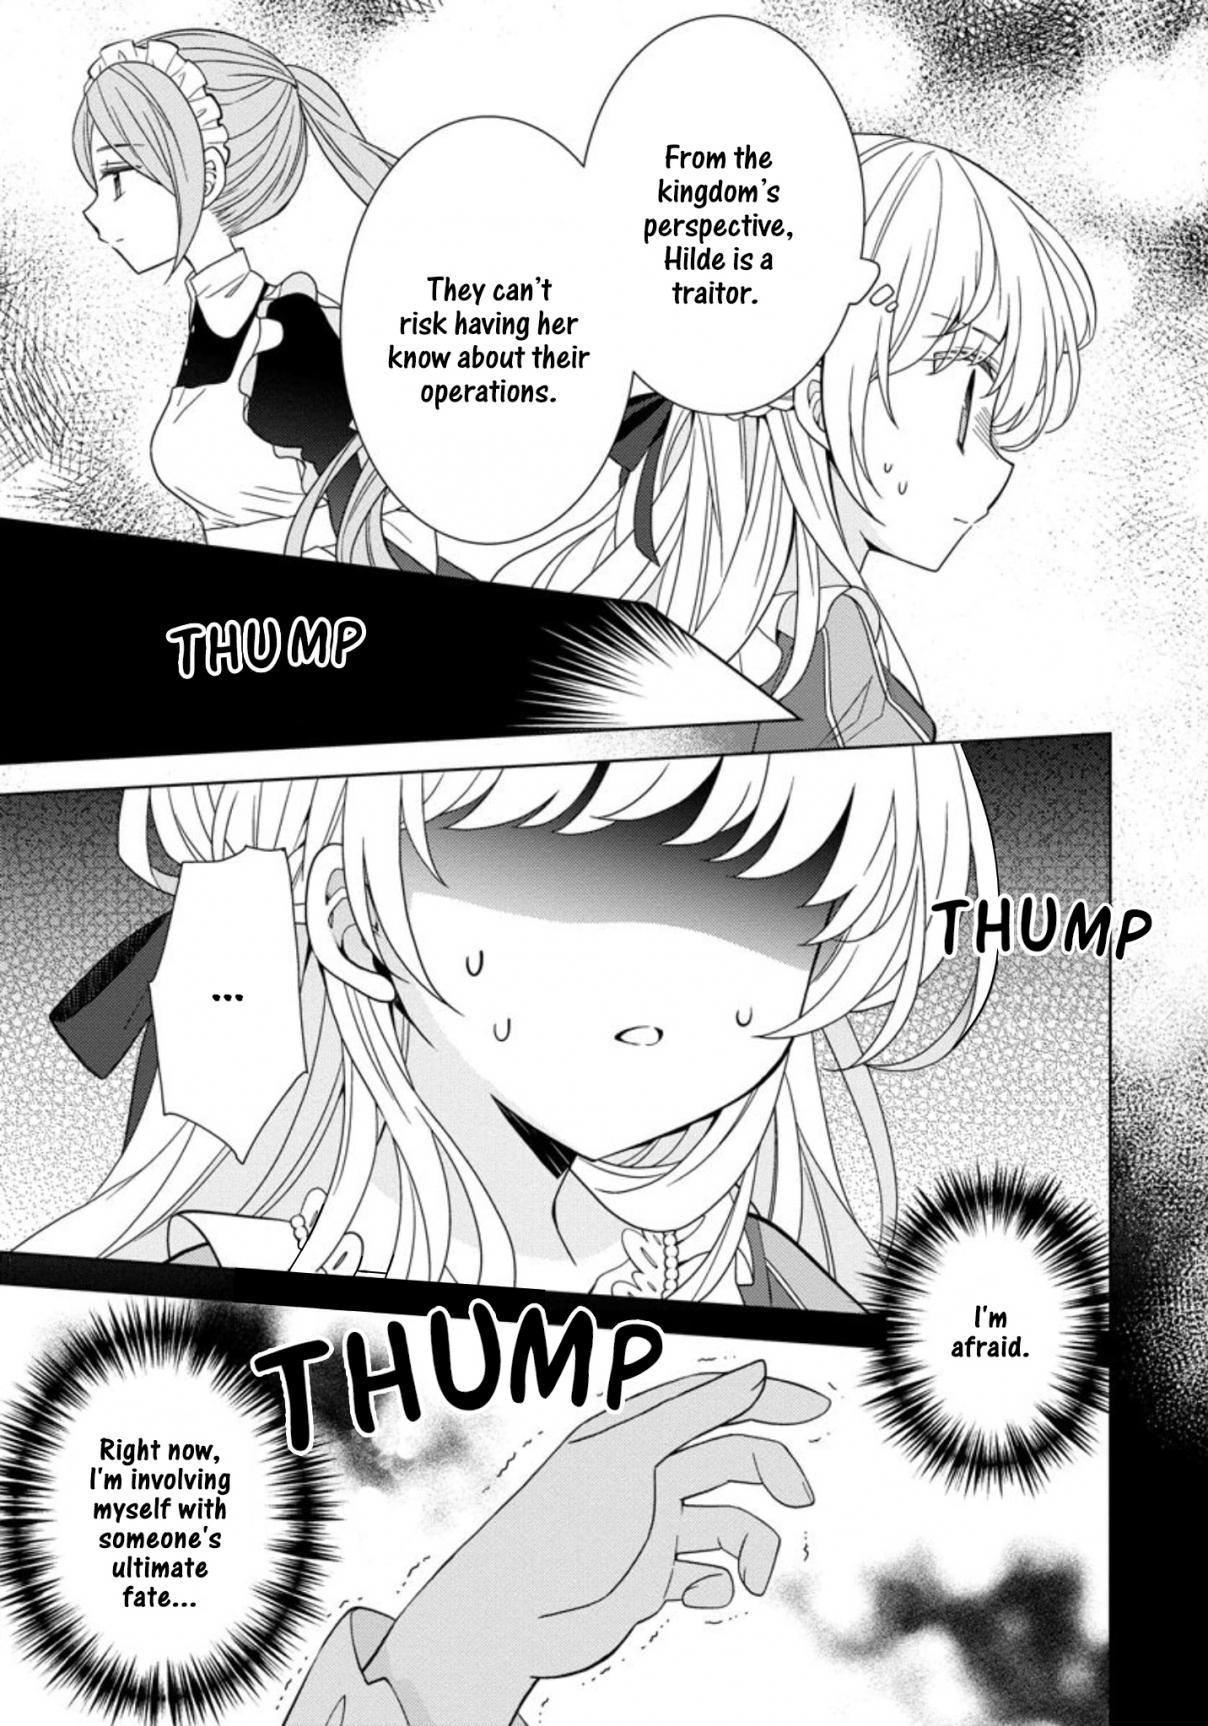 The Reincarnated Princess Strikes Down Flags Today as Well Vol. 1 Ch. 7